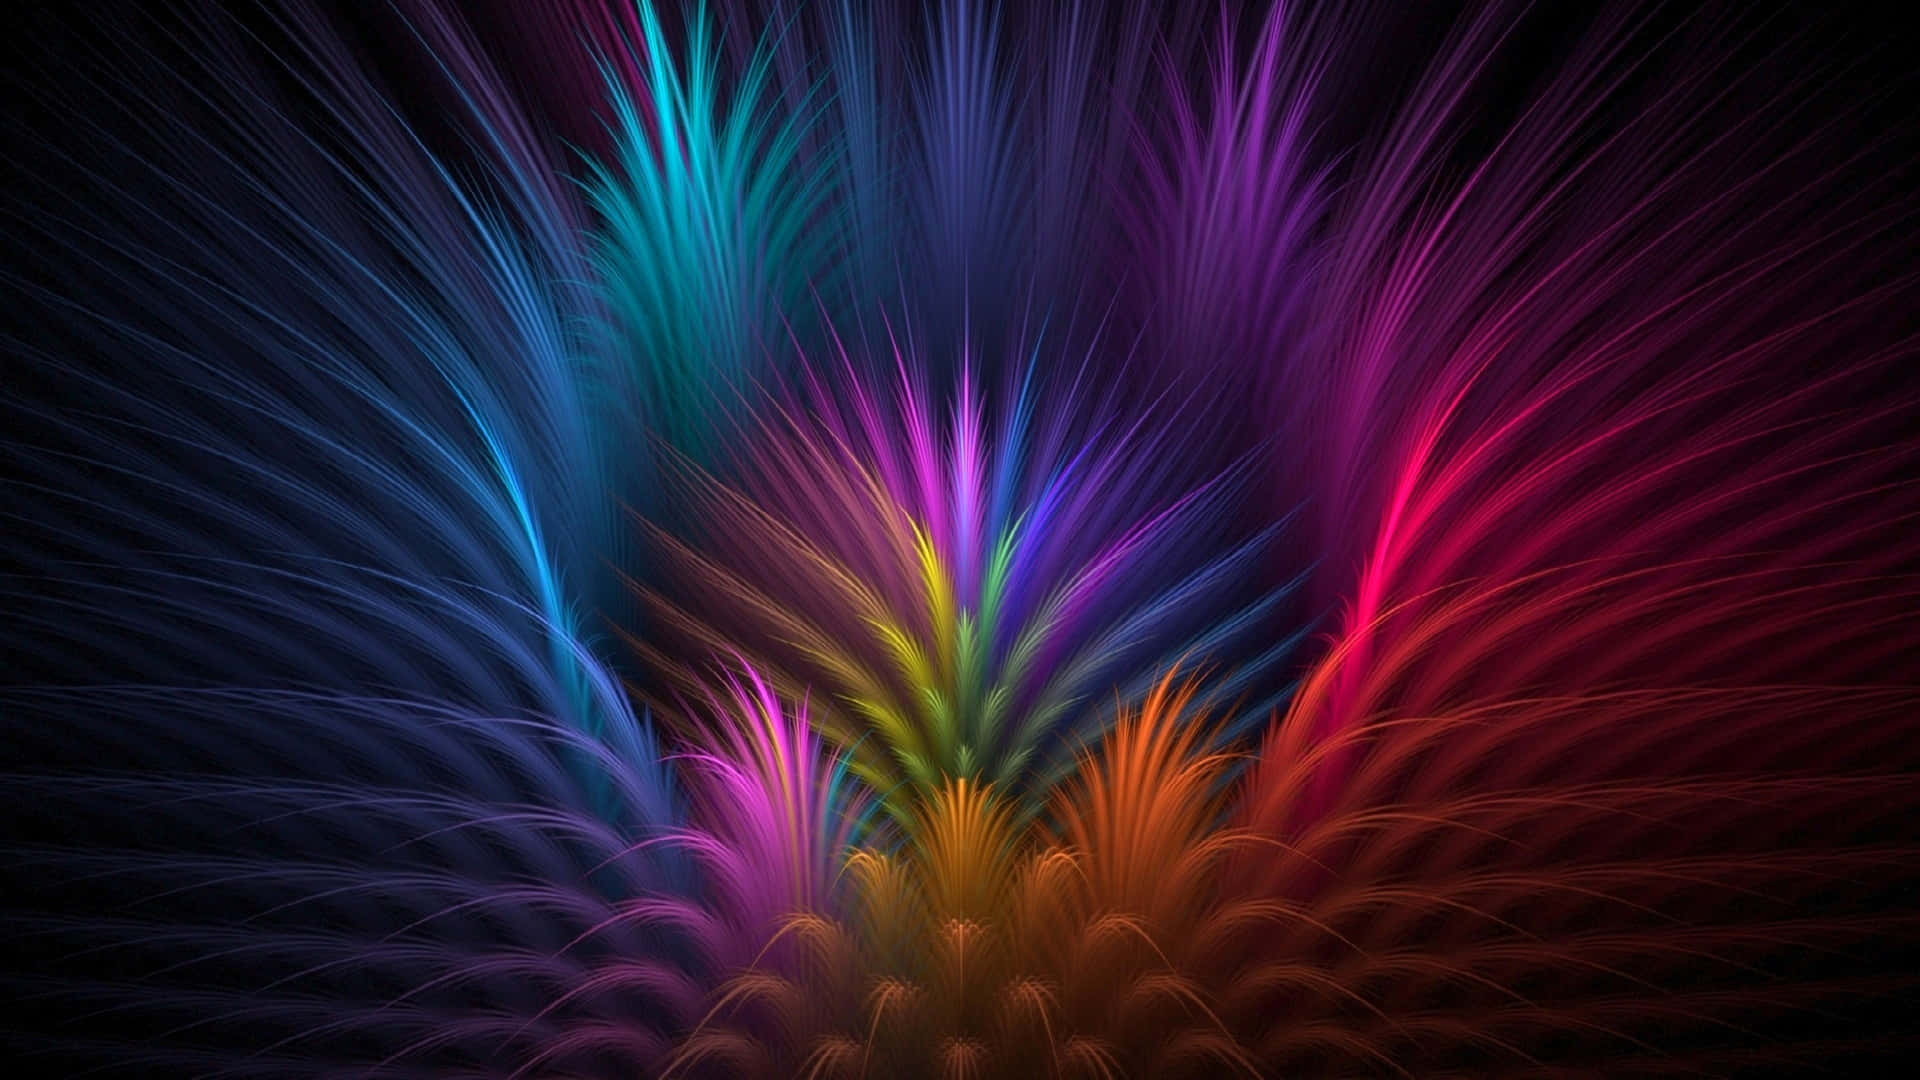 Colourful Background